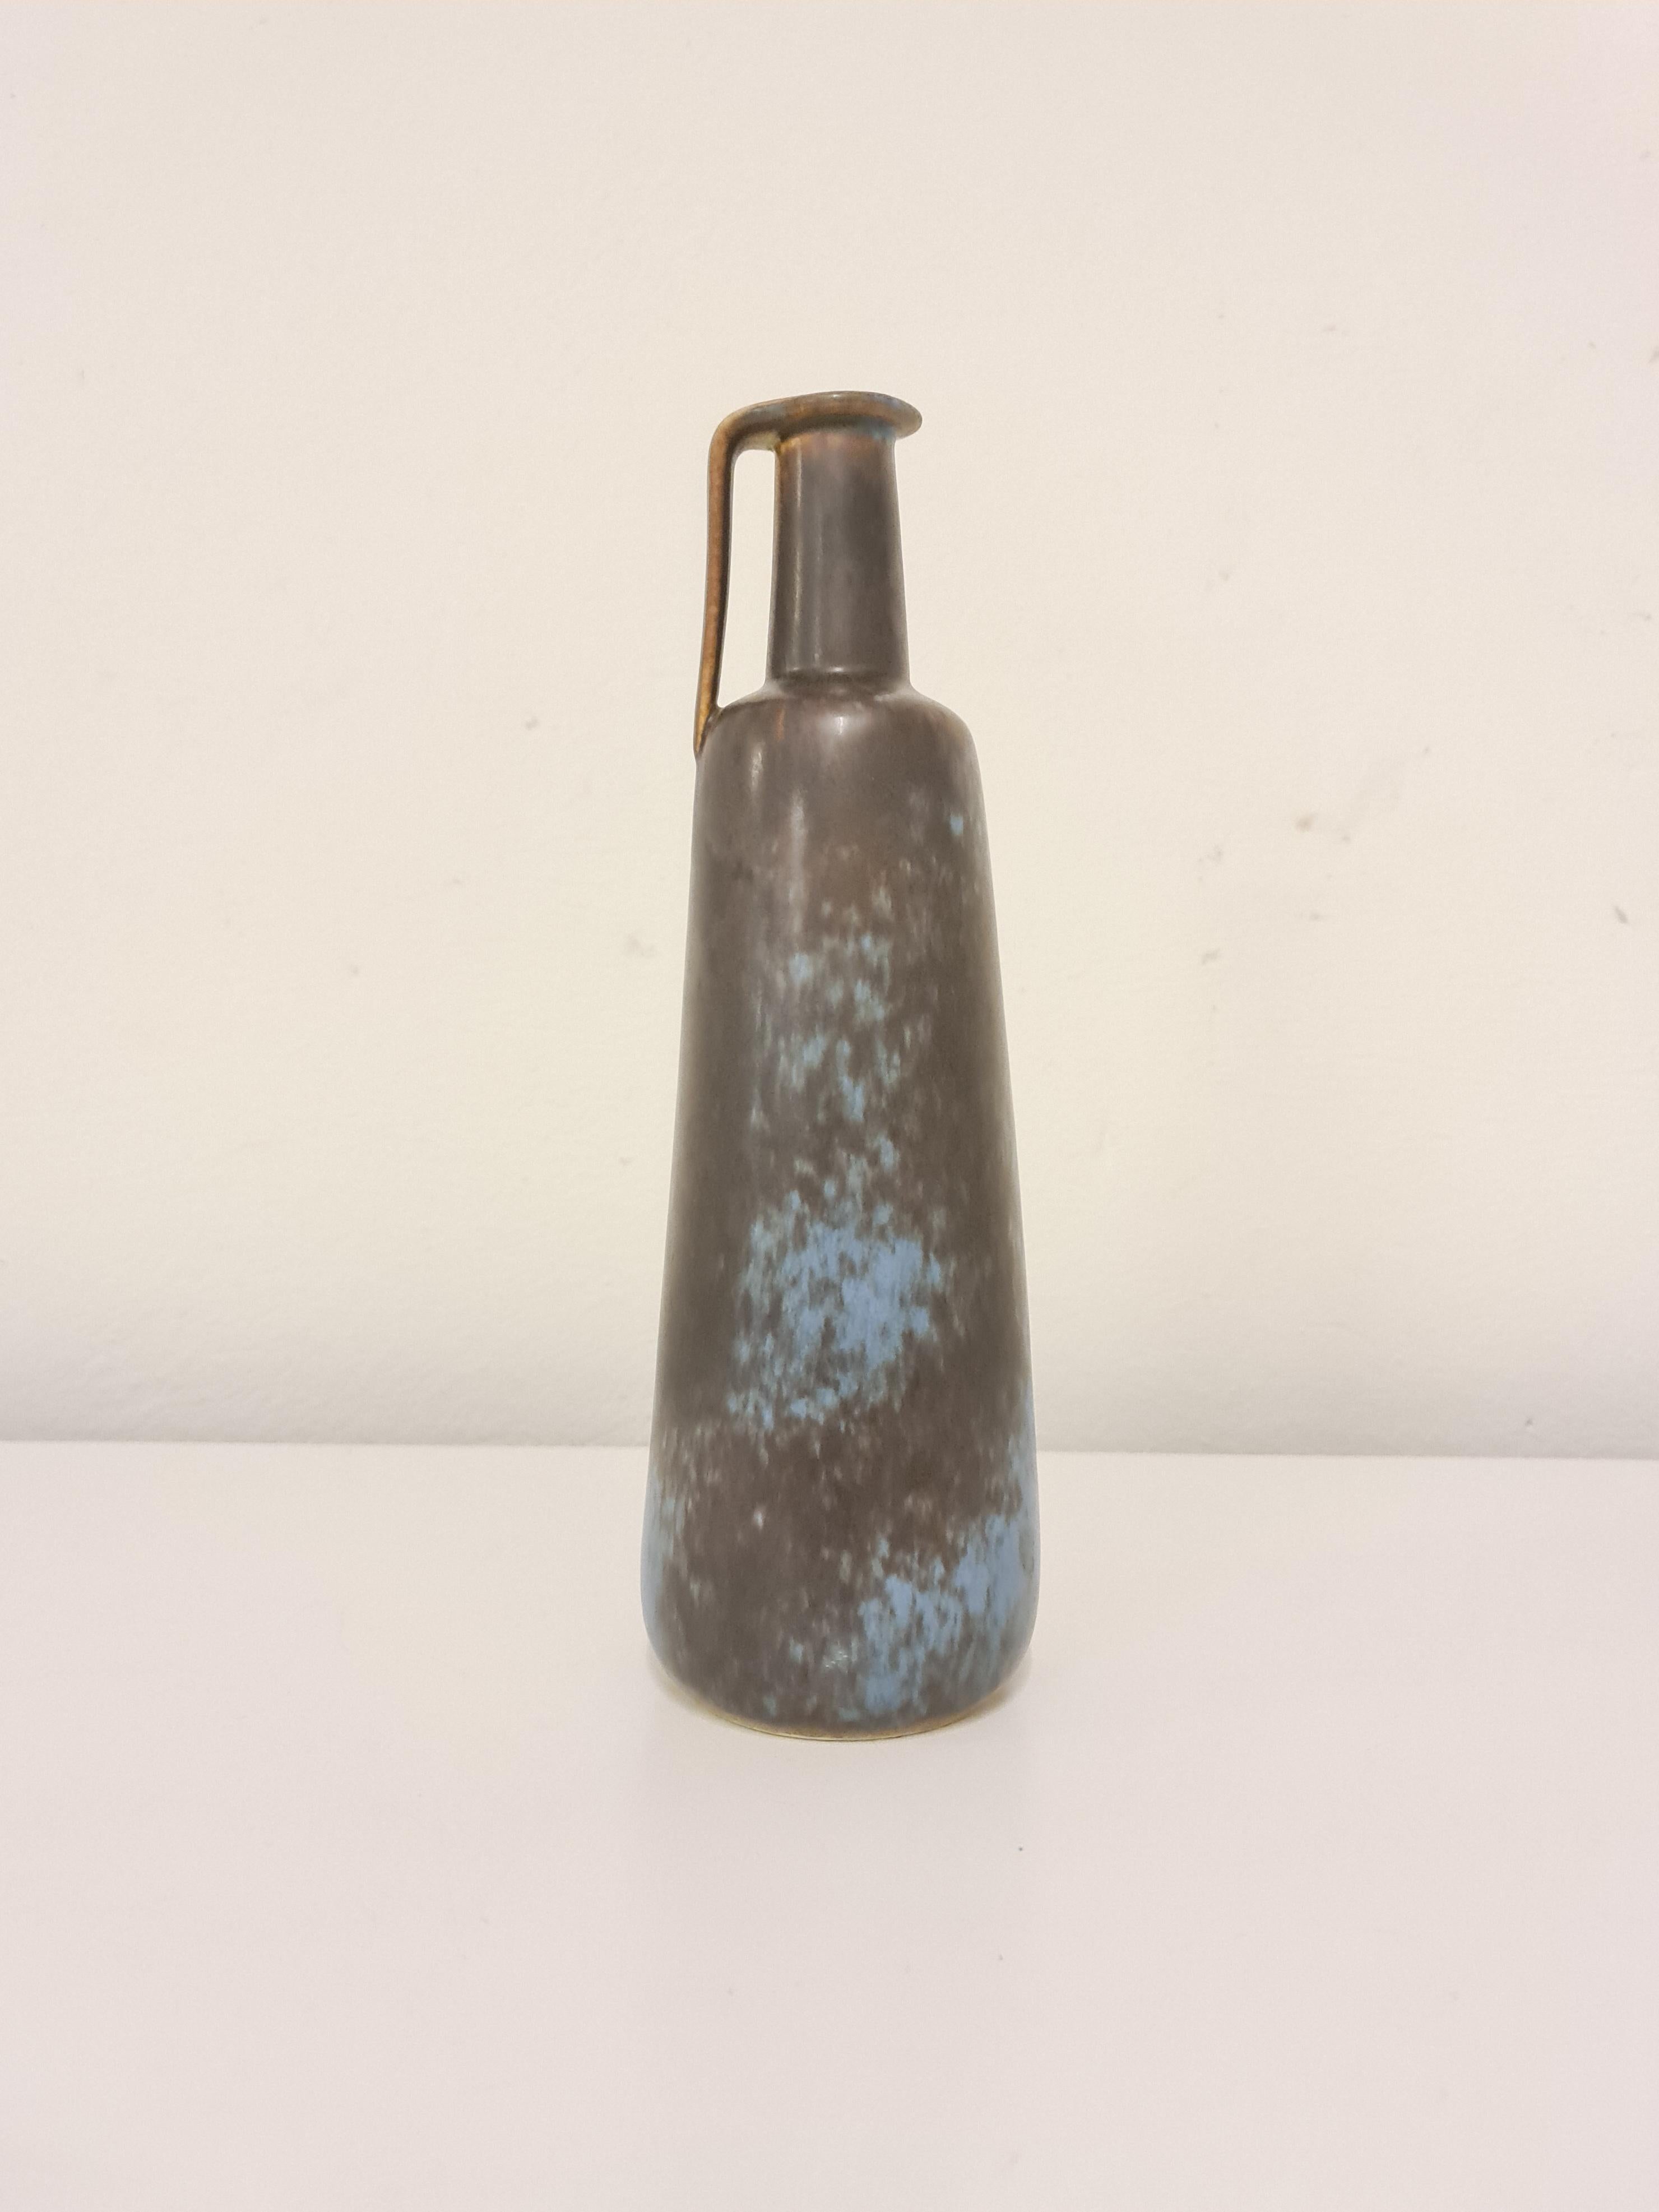 A gorgeous vase from Rörstrand and maker/Designer Gunnar Nylund. Made in Sweden in the midcentury. Beautiful glazed in shifting colors 

Good condition. 

Measures: Height 29 cm, diameter at the bottom 9 cm.
 